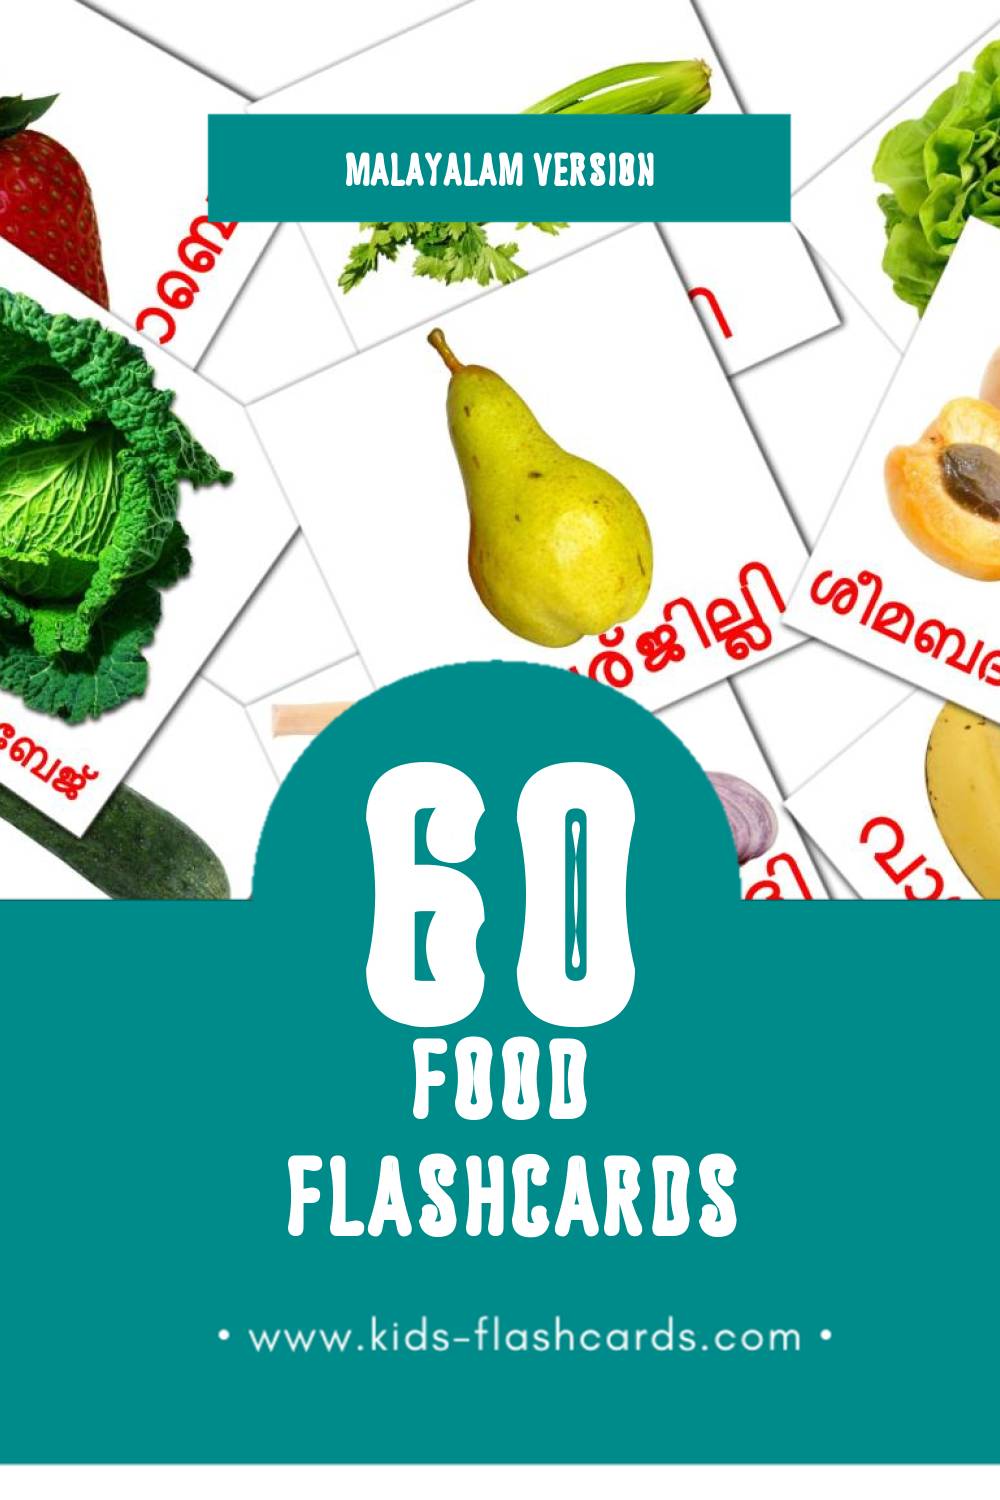 Visual ഭക്ഷണം Flashcards for Toddlers (60 cards in Malayalam)